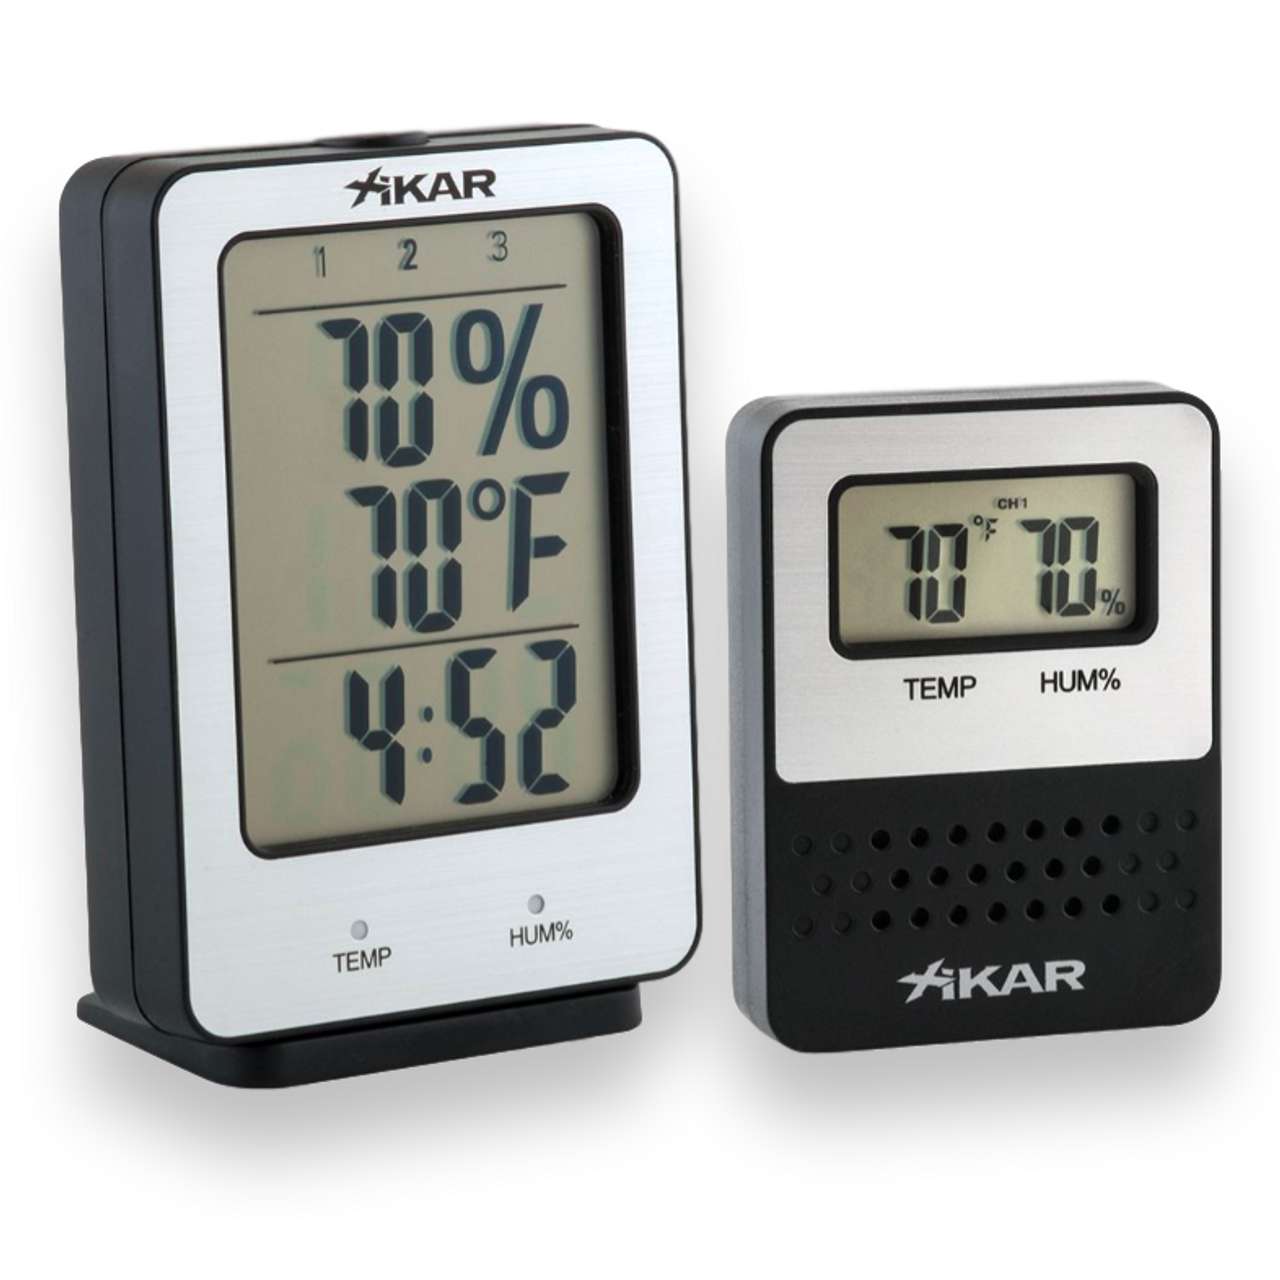 https://cdn11.bigcommerce.com/s-c63ufk/images/stencil/1280x1280/products/1119/6311/Xikar-Purotemp-Wireless-Hygrometer-Base-Unit-with-1-Remote-Sensor--Exterior-Top-1_clipped_rev_1__45020.1600036339.png?c=2?imbypass=on